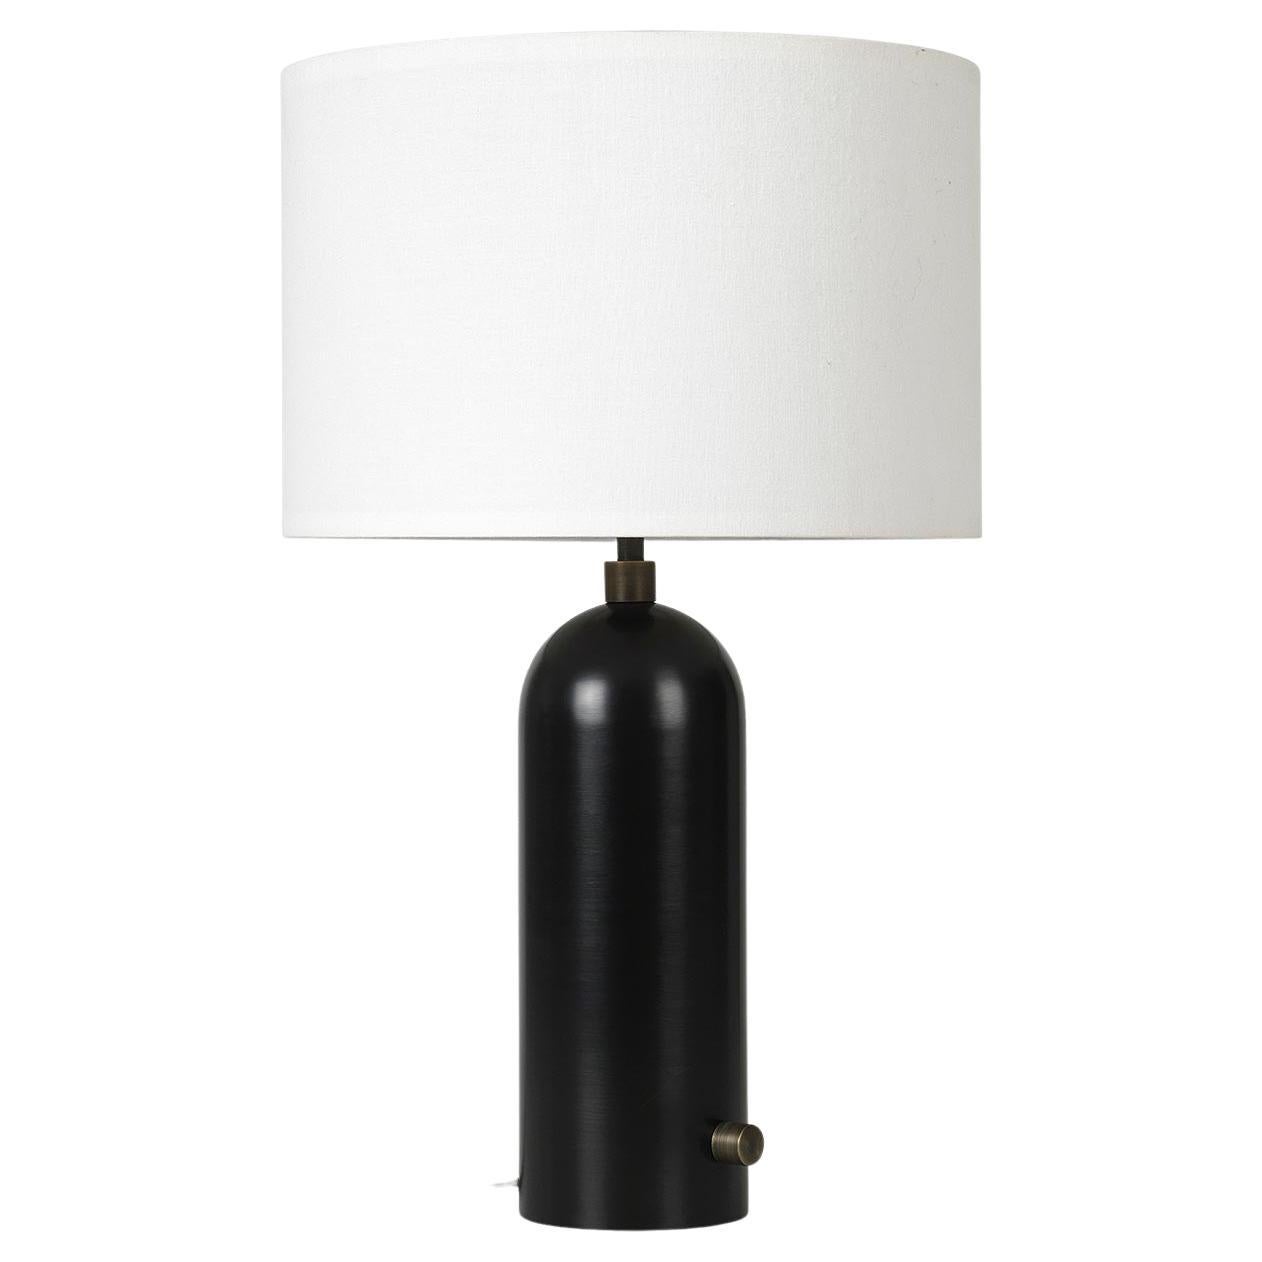 Gravity Table Lamp - Small, Blackened Steel, White For Sale